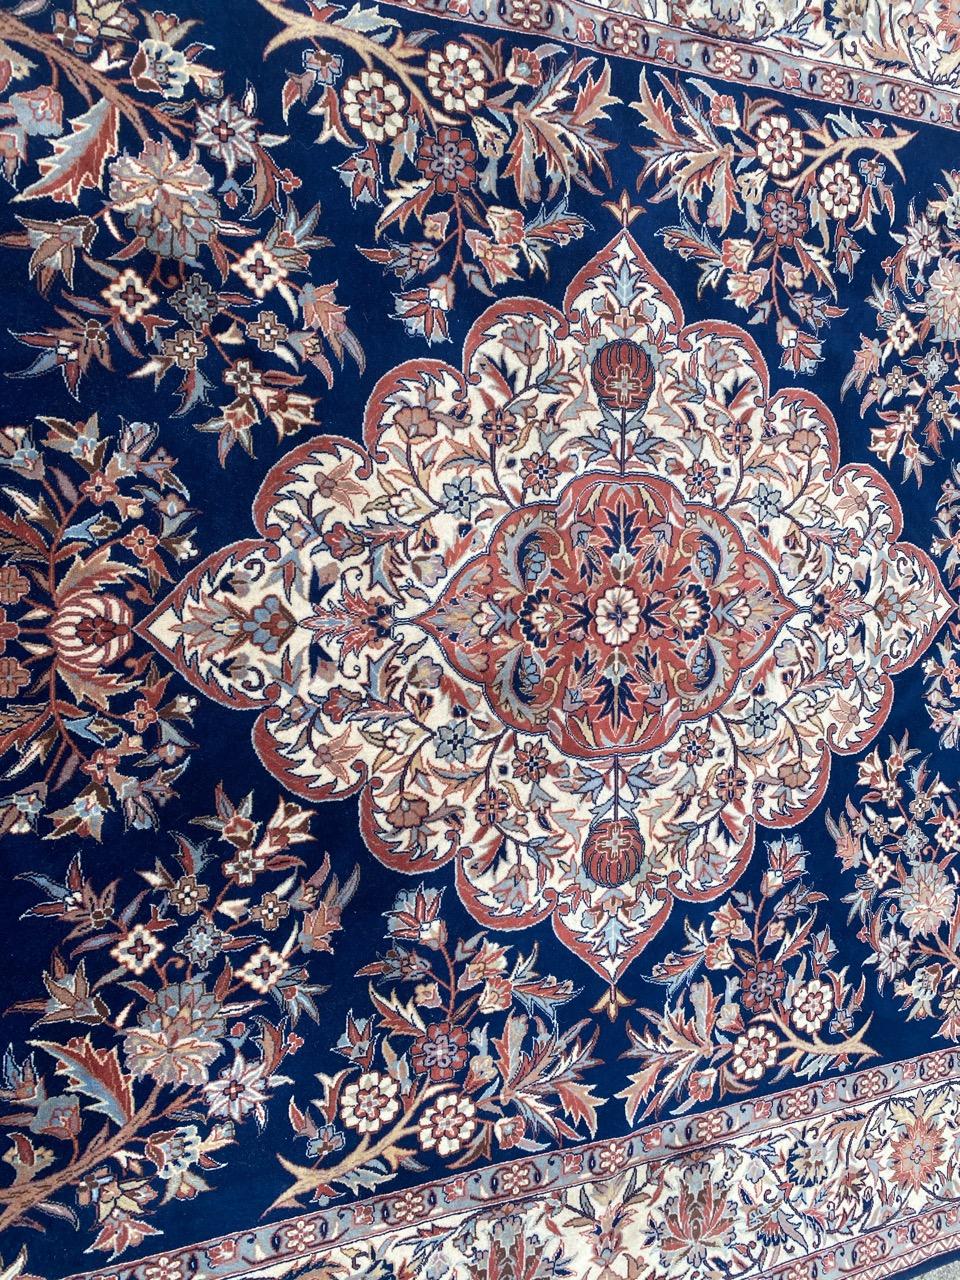 Very beautiful mid century Persian design rug with nice floral and central medallion design and nice colors with blue field, entirely and finely hand knotted with wool velvet on cotton foundation.

✨✨✨
